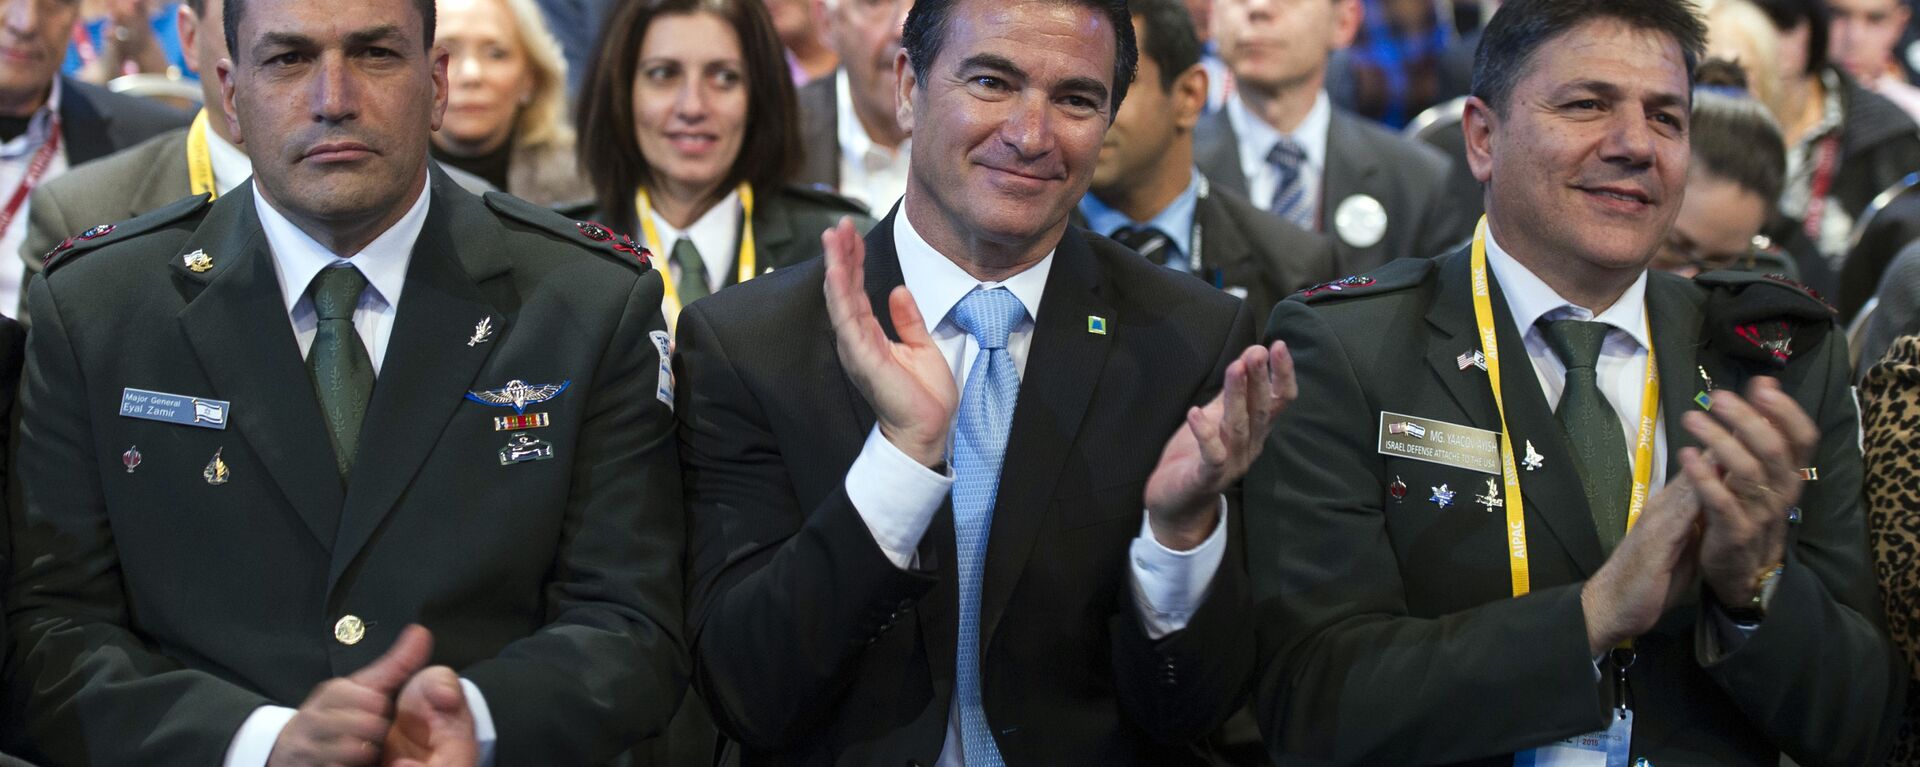 Israeli National Security Adviser Yossi Cohen, center, applauds National Security Adviser Susan Rice as she addresses the 2015 American Israel Public Affairs Committee (AIPAC) Policy Conference in Washington, Monday, March 2, 2015. - Sputnik International, 1920, 30.05.2021